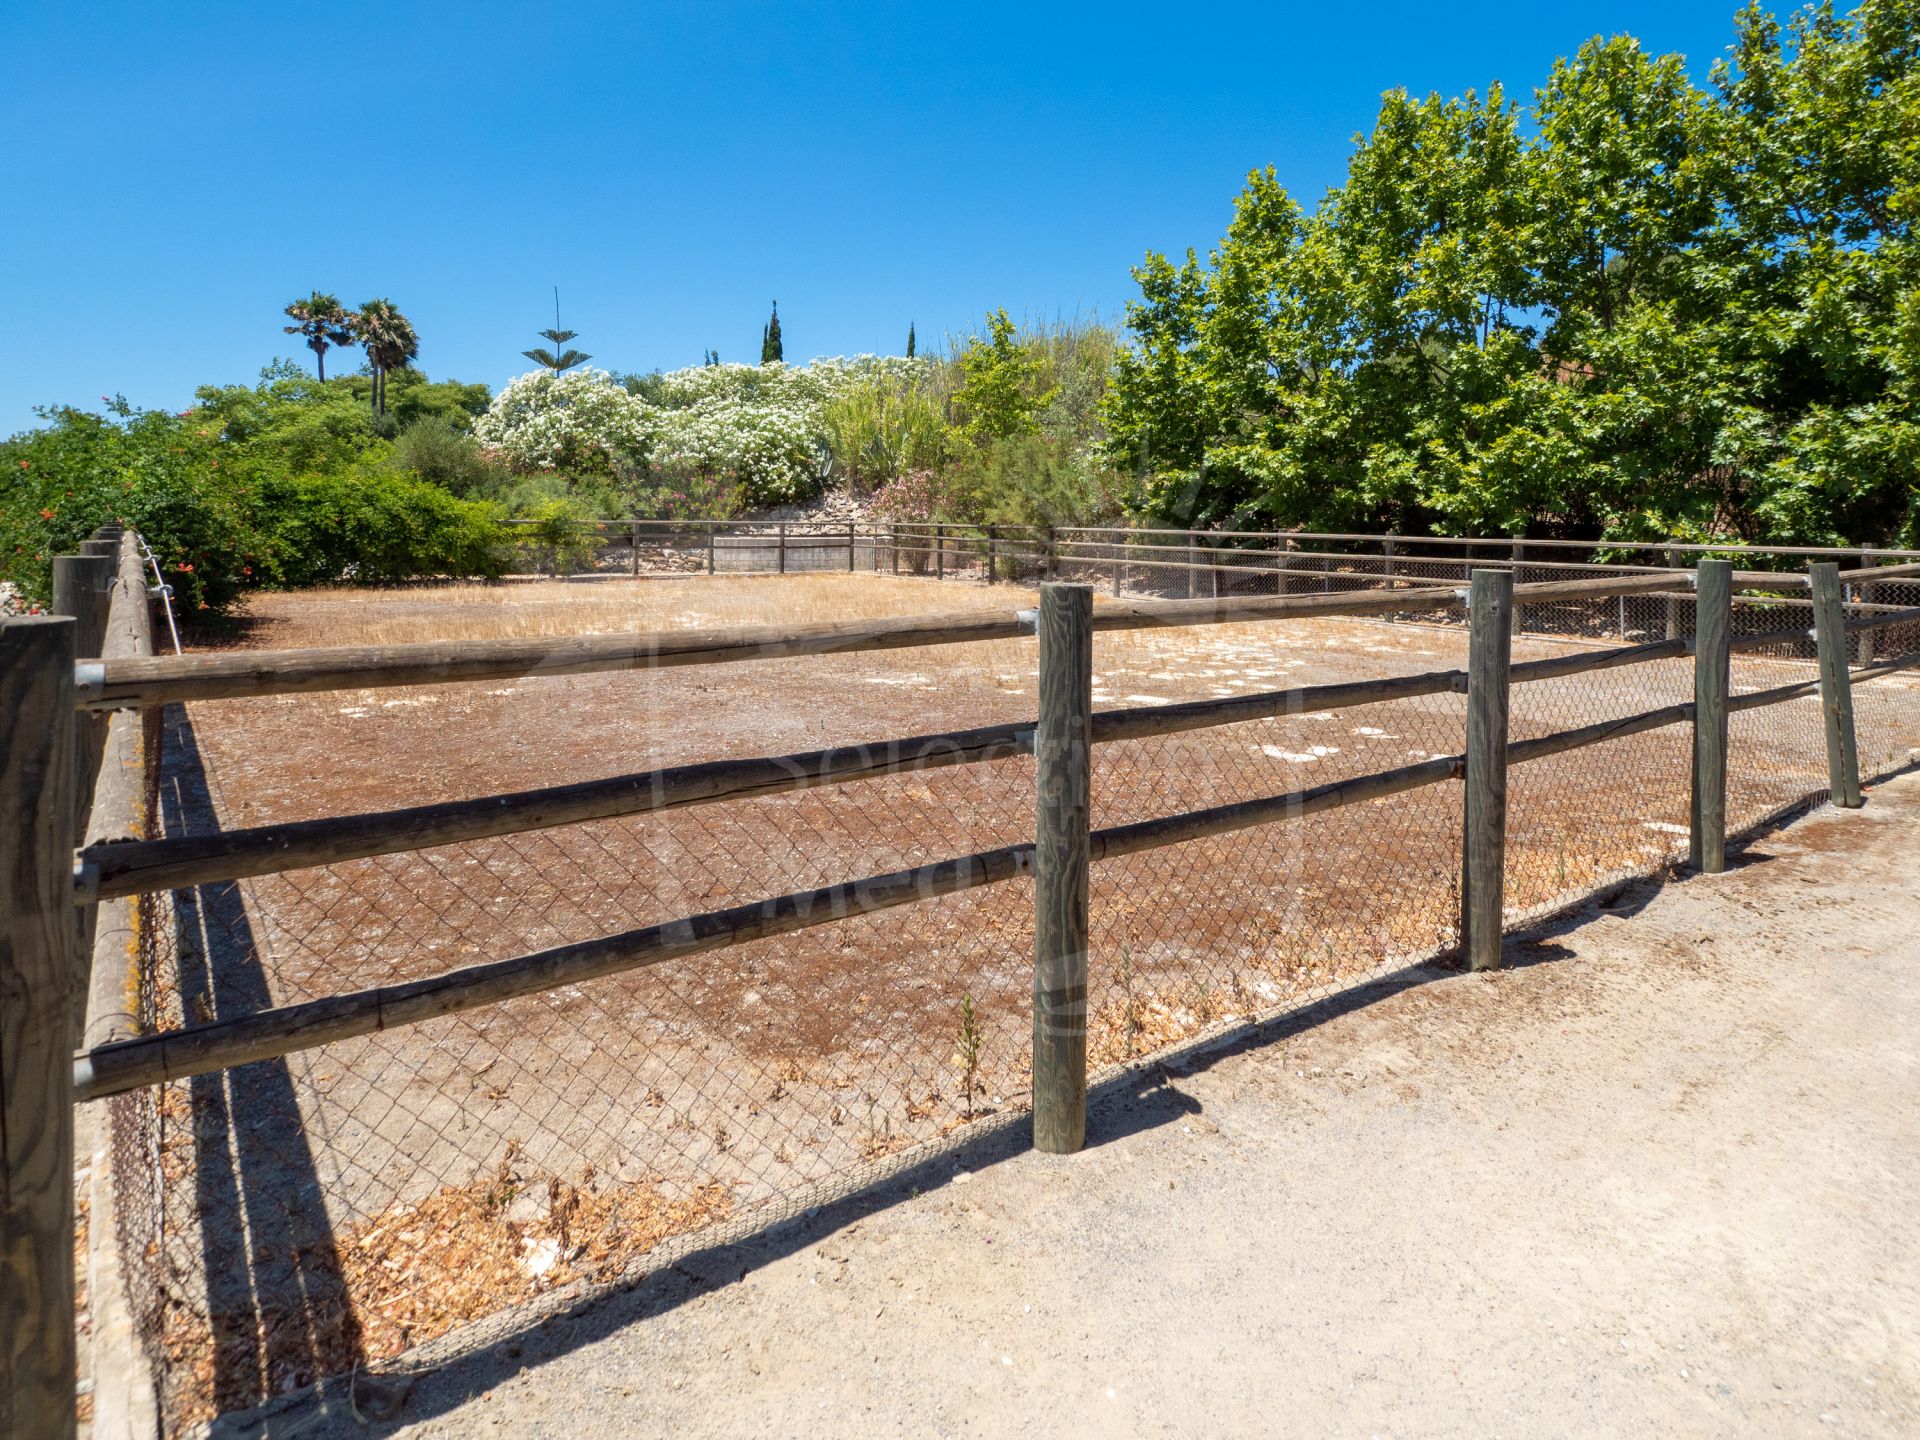 Unique Equestrian Country Estate Situated on an Elevated Plot of 19000m2 with a Beautiful Finca and Guest Accommodation, Only a Short Drive From Sotogrande.